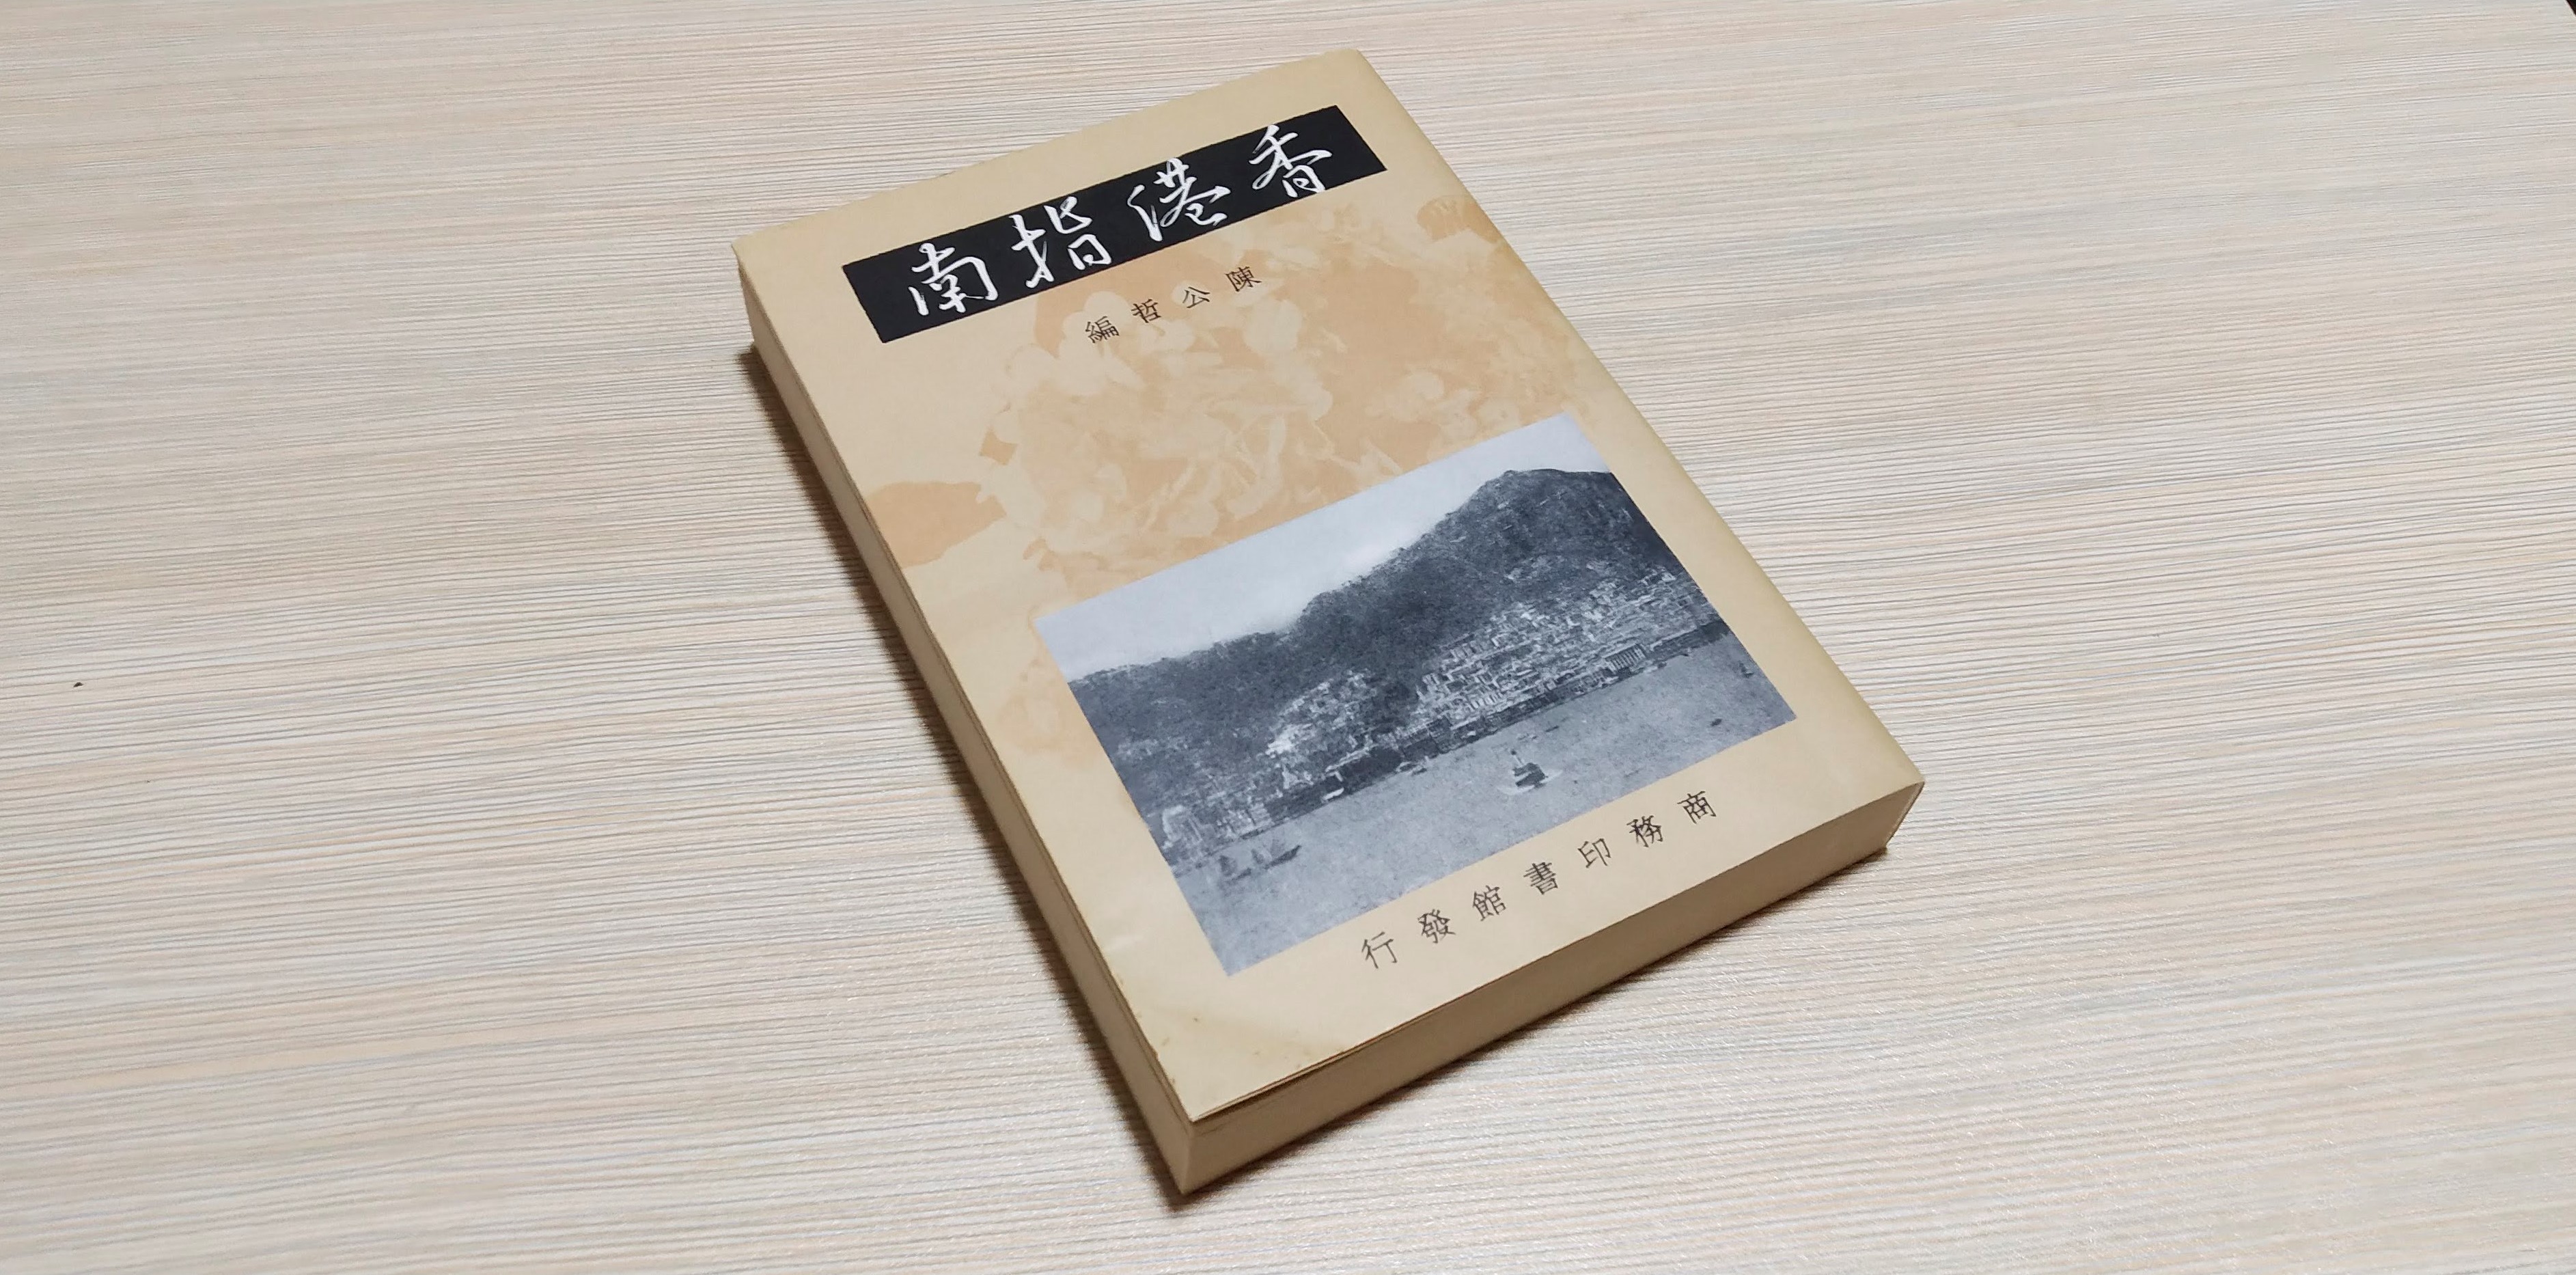 Hong Kong Guidebook was published in 1938.